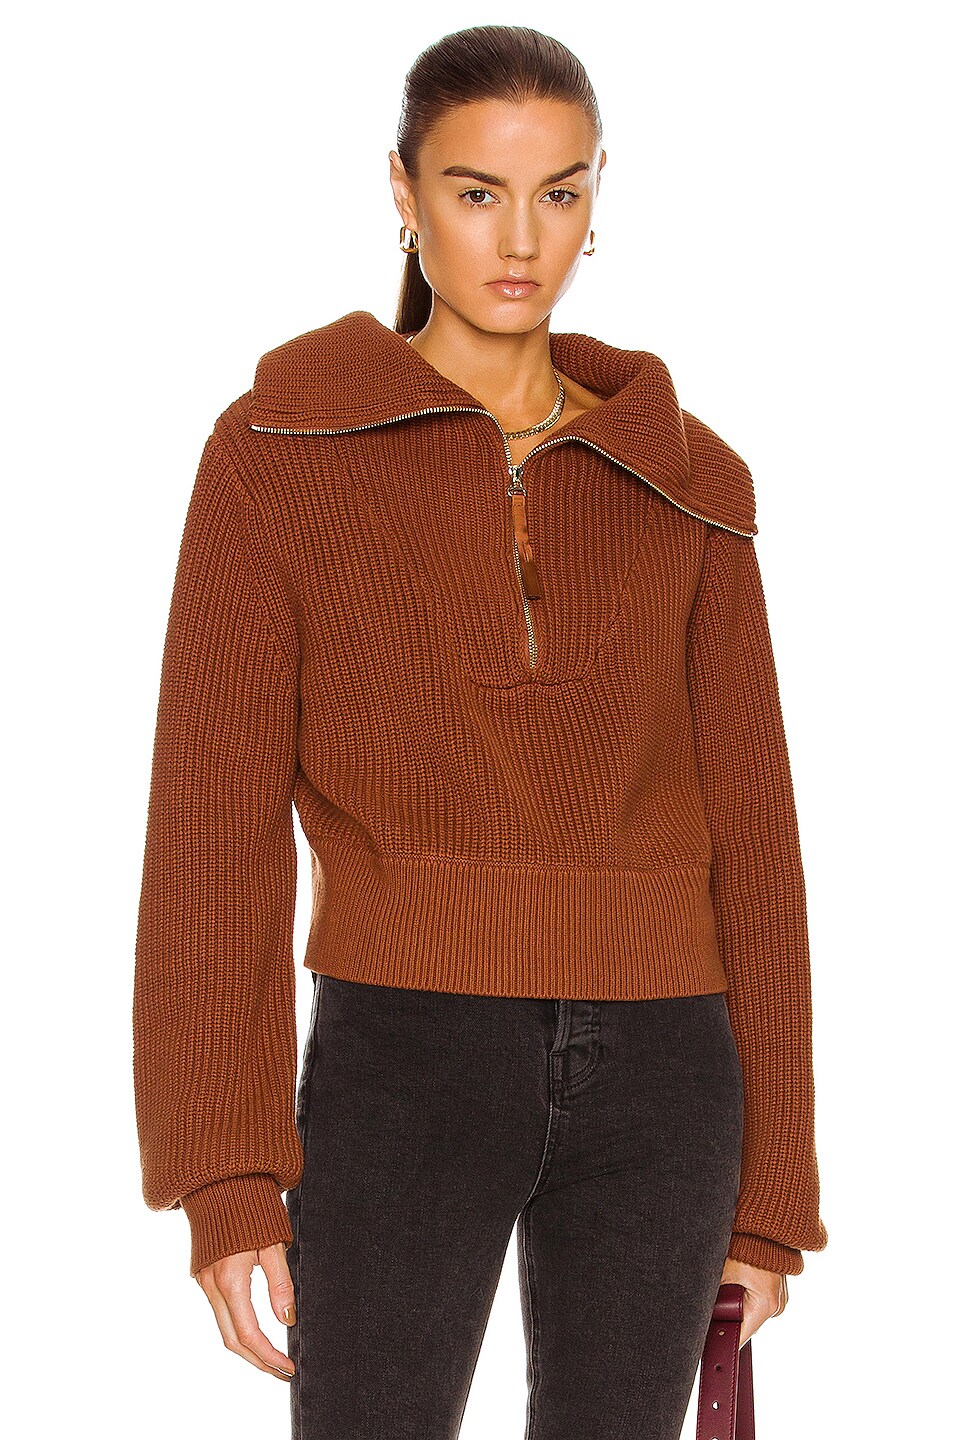 Image 1 of Varley Mentone Sweater in Tortoise Shell